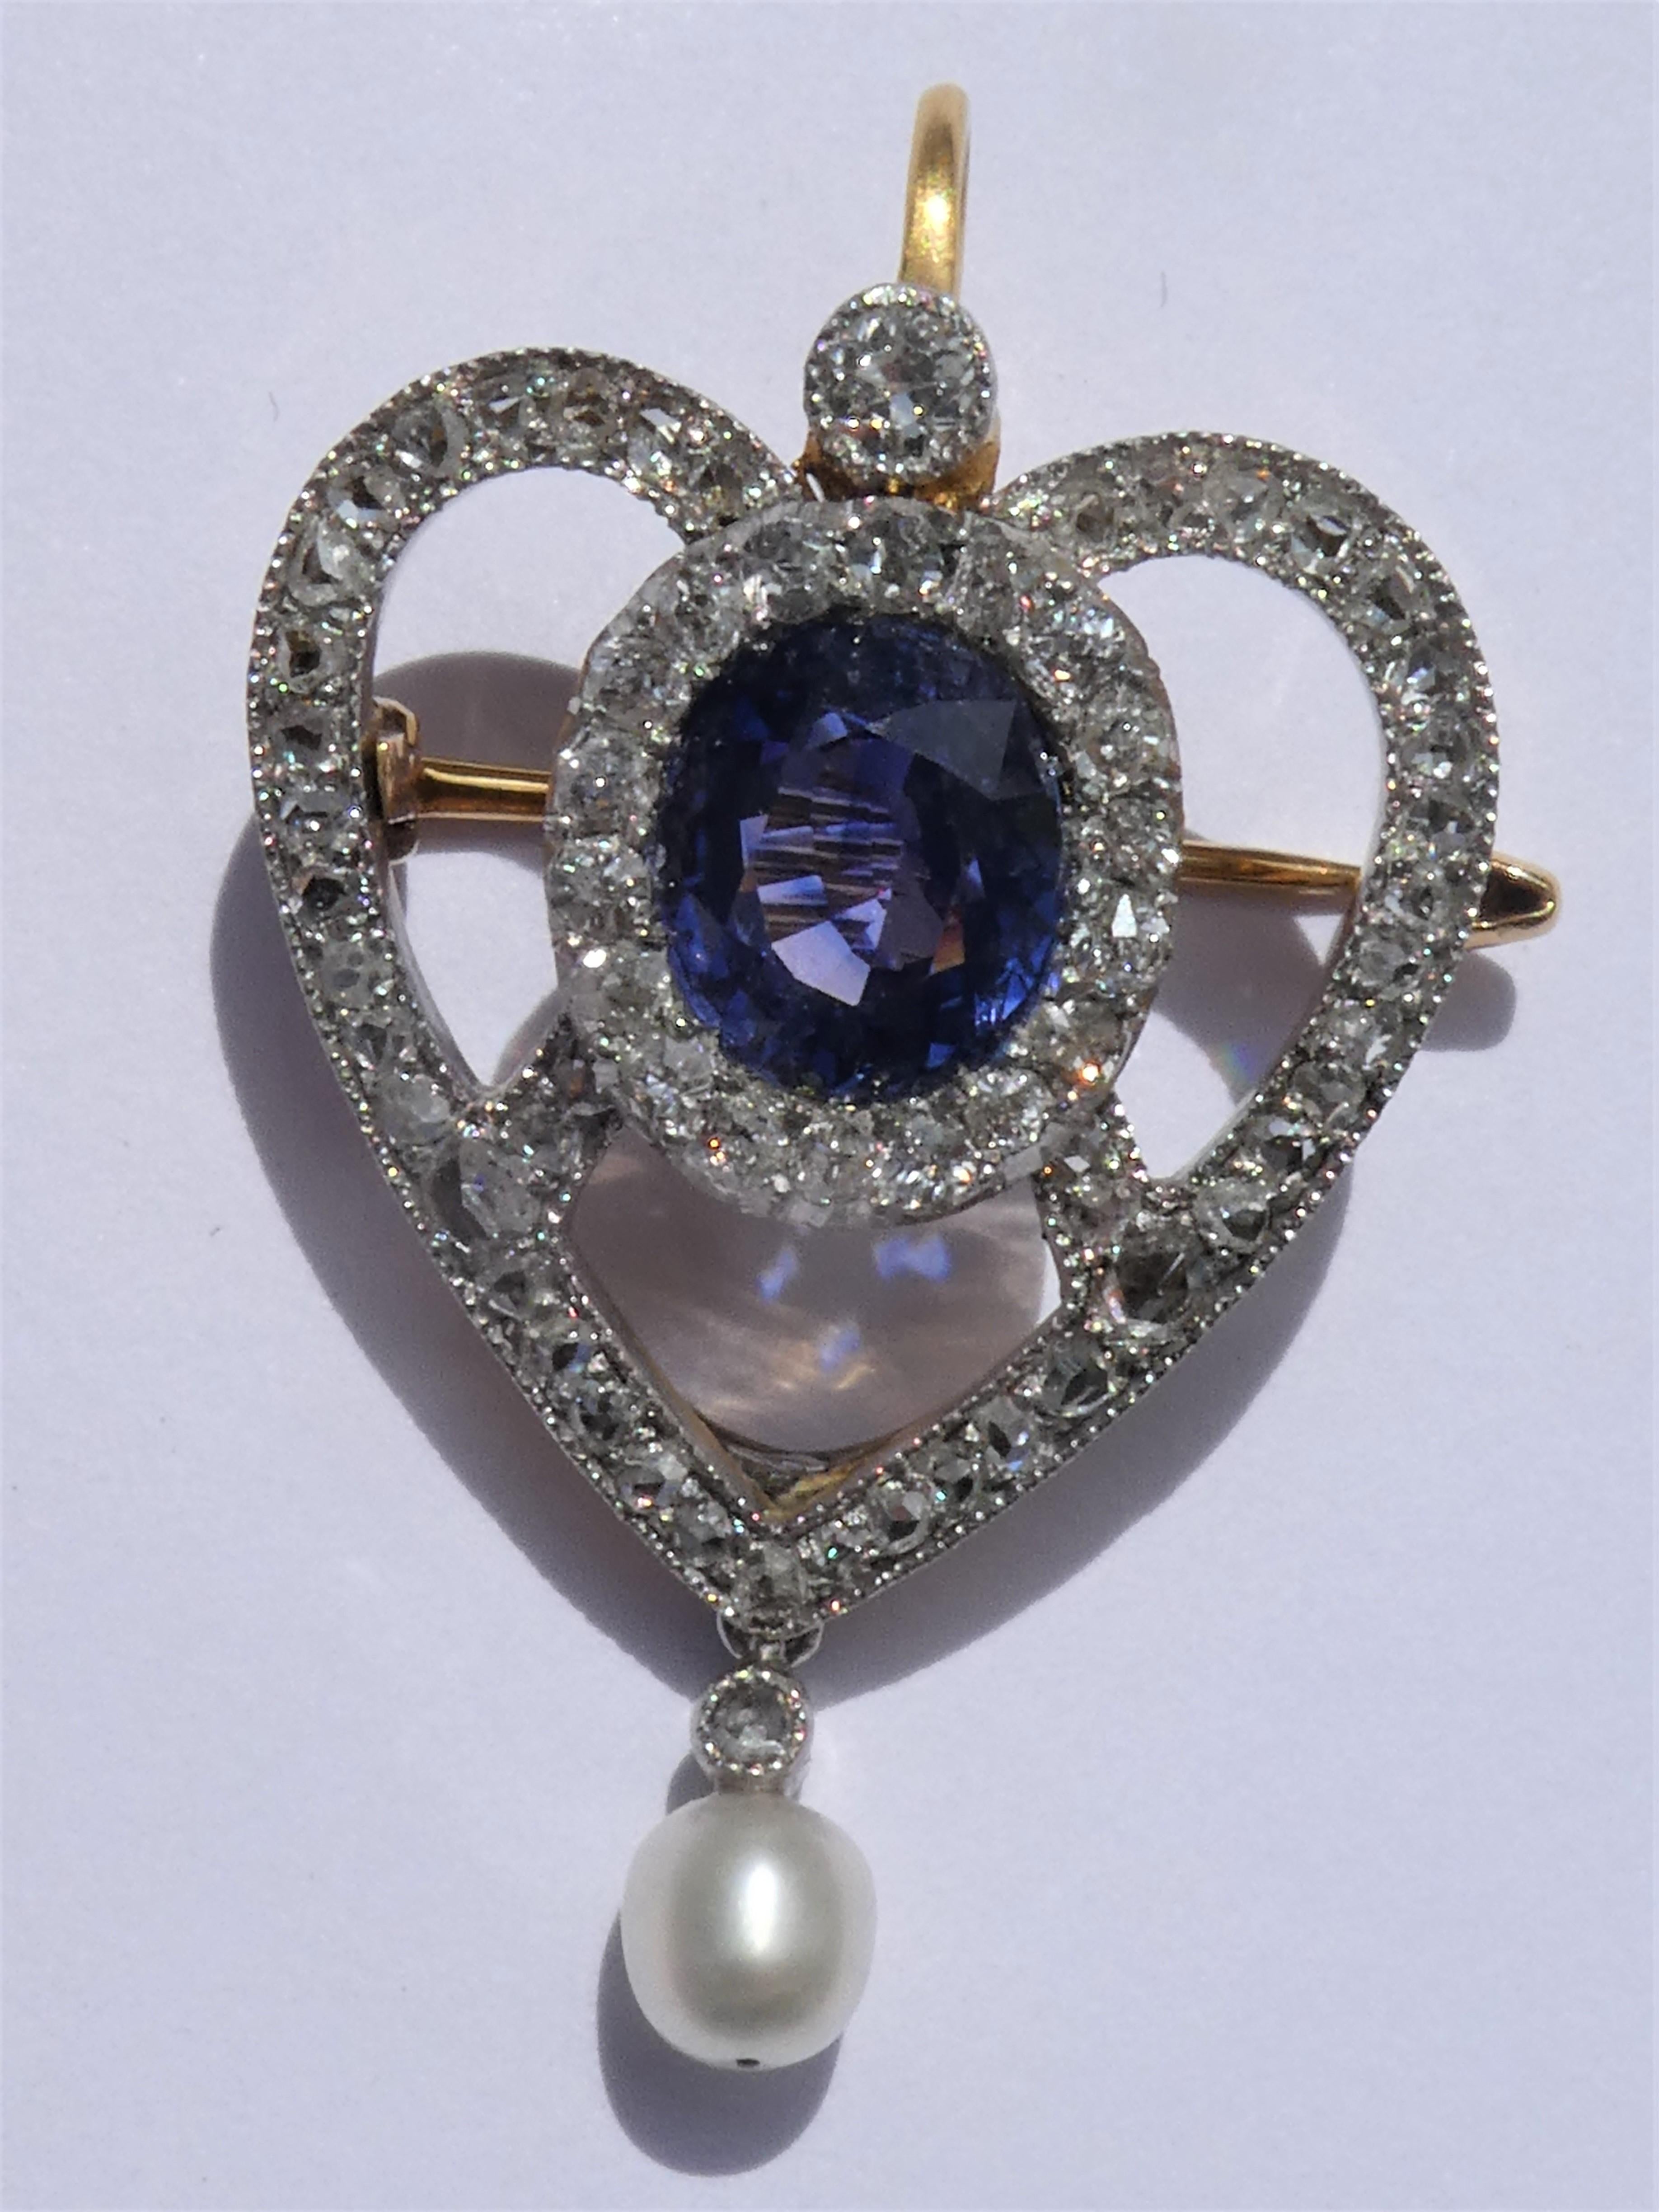 This lovely heart brooch was crafted in England circa 1910 and can also be worn as a pendant. It has a fold down attachement behind the top diamond which turns down if it is worn as a brooch. There is a gold frame in the back which can be unscrewed